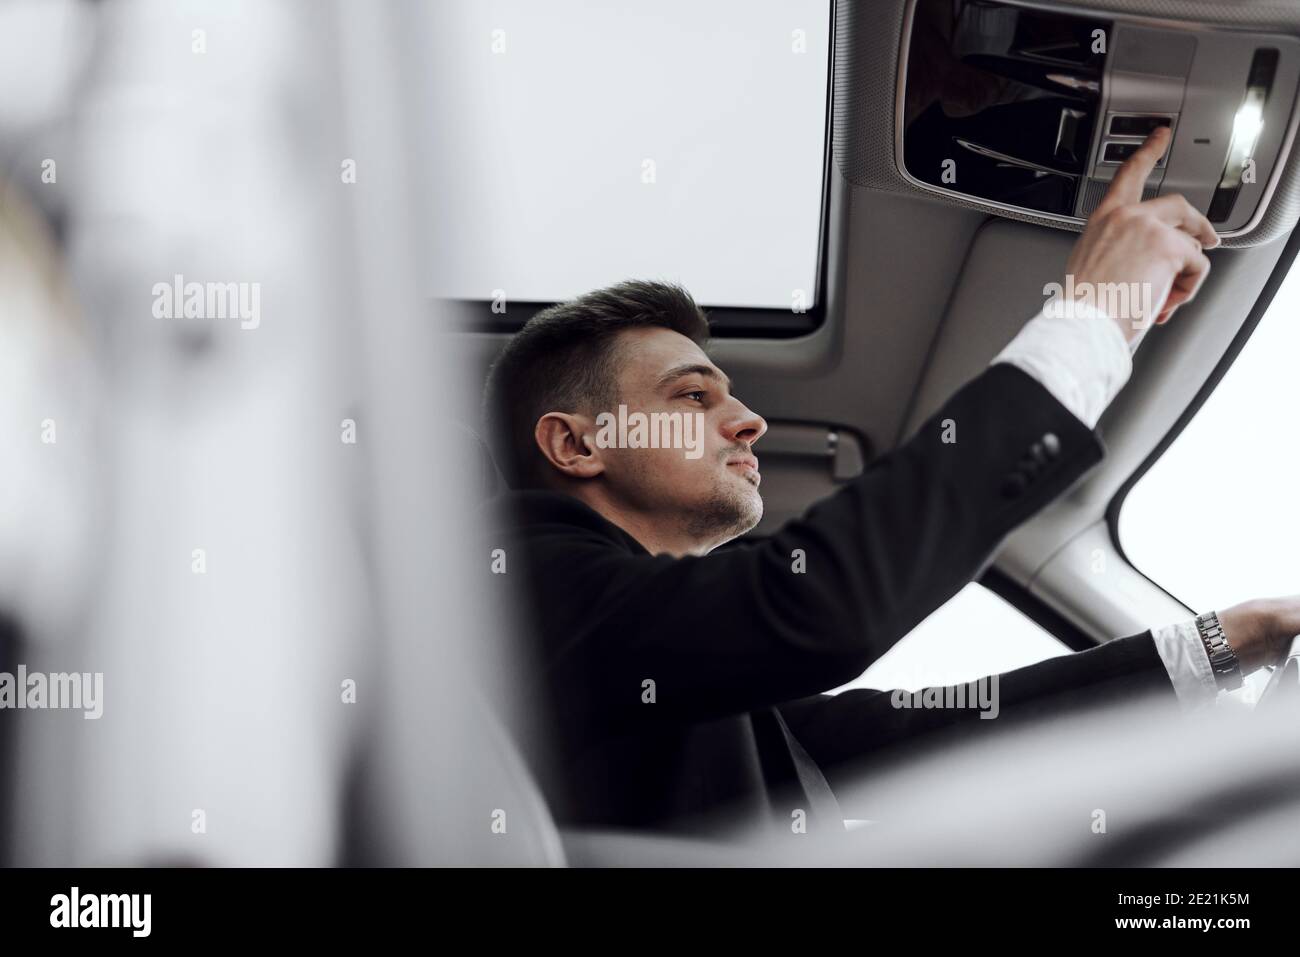 Cropped photo of handsome man renting modern automobile while pushing button. Rent and trade-in concept Stock Photo